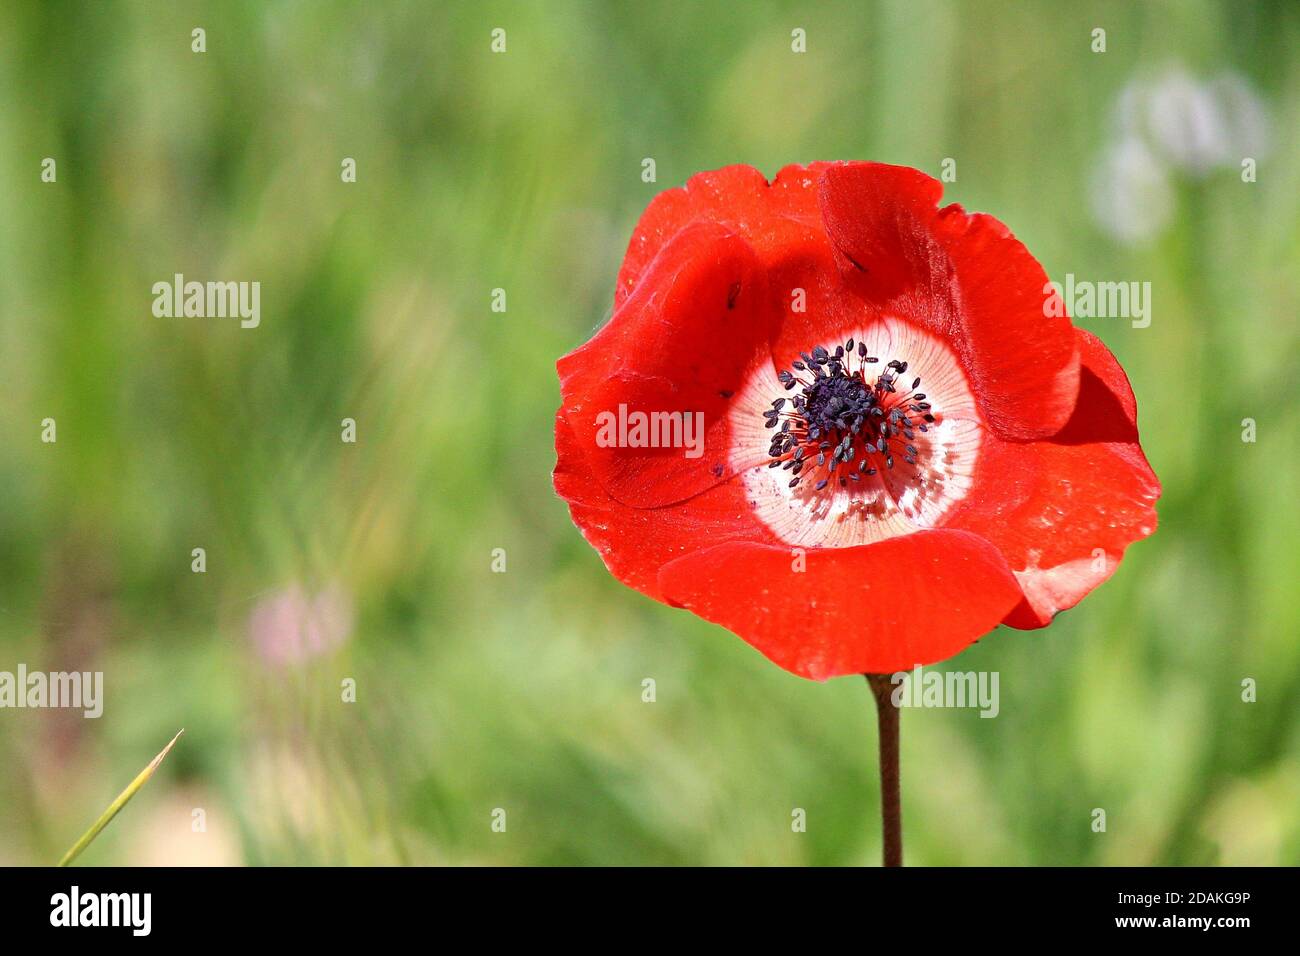 Red Anemone coronaria or beautiful Poppy Anemone blossom with 6 petals close up. Stock Photo